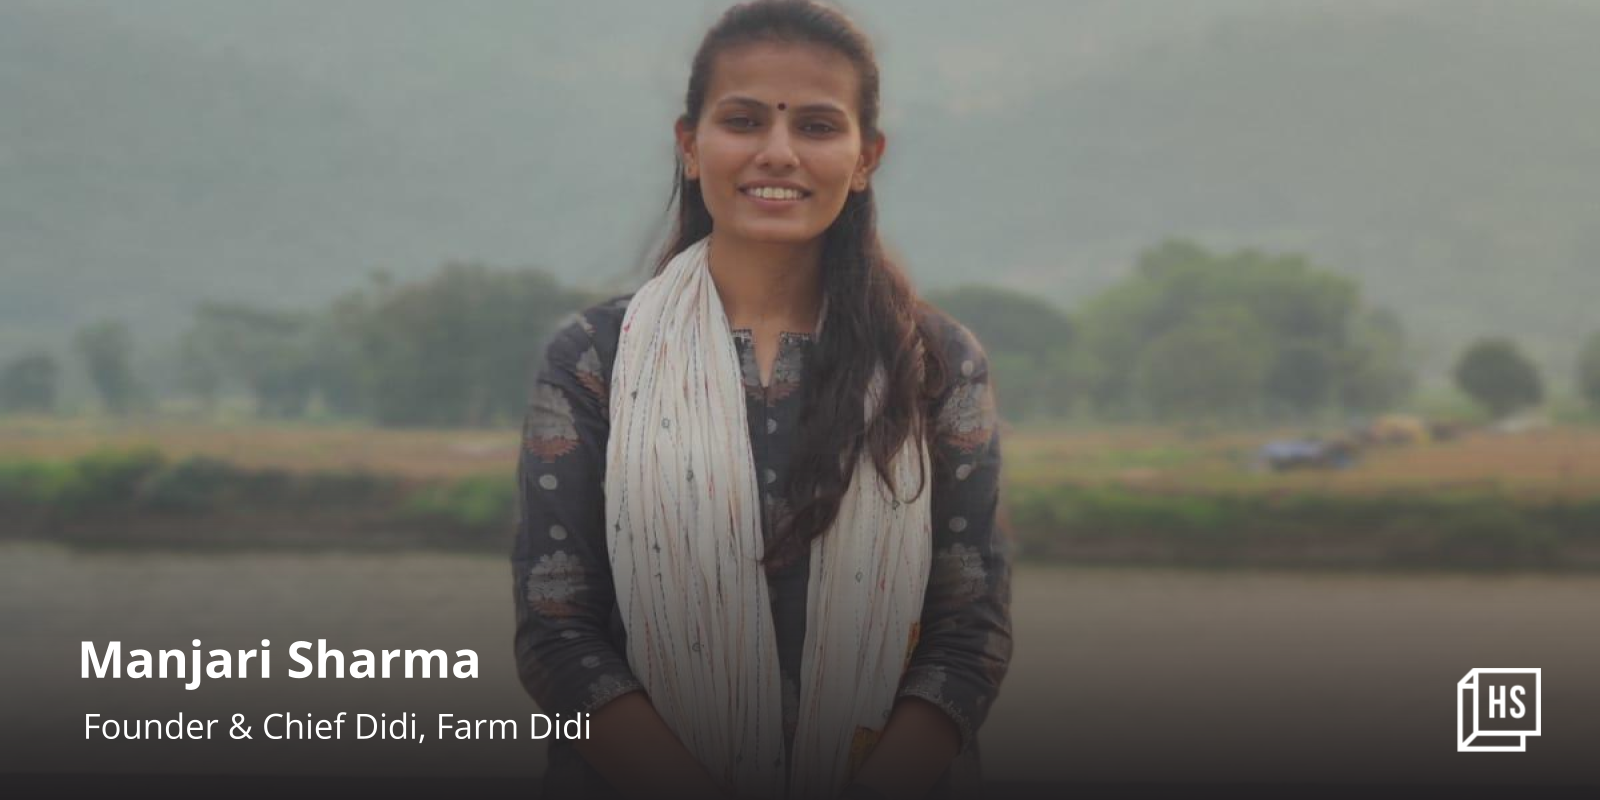 This didi’s foodtech startup is empowering women in rural Maharashtra
